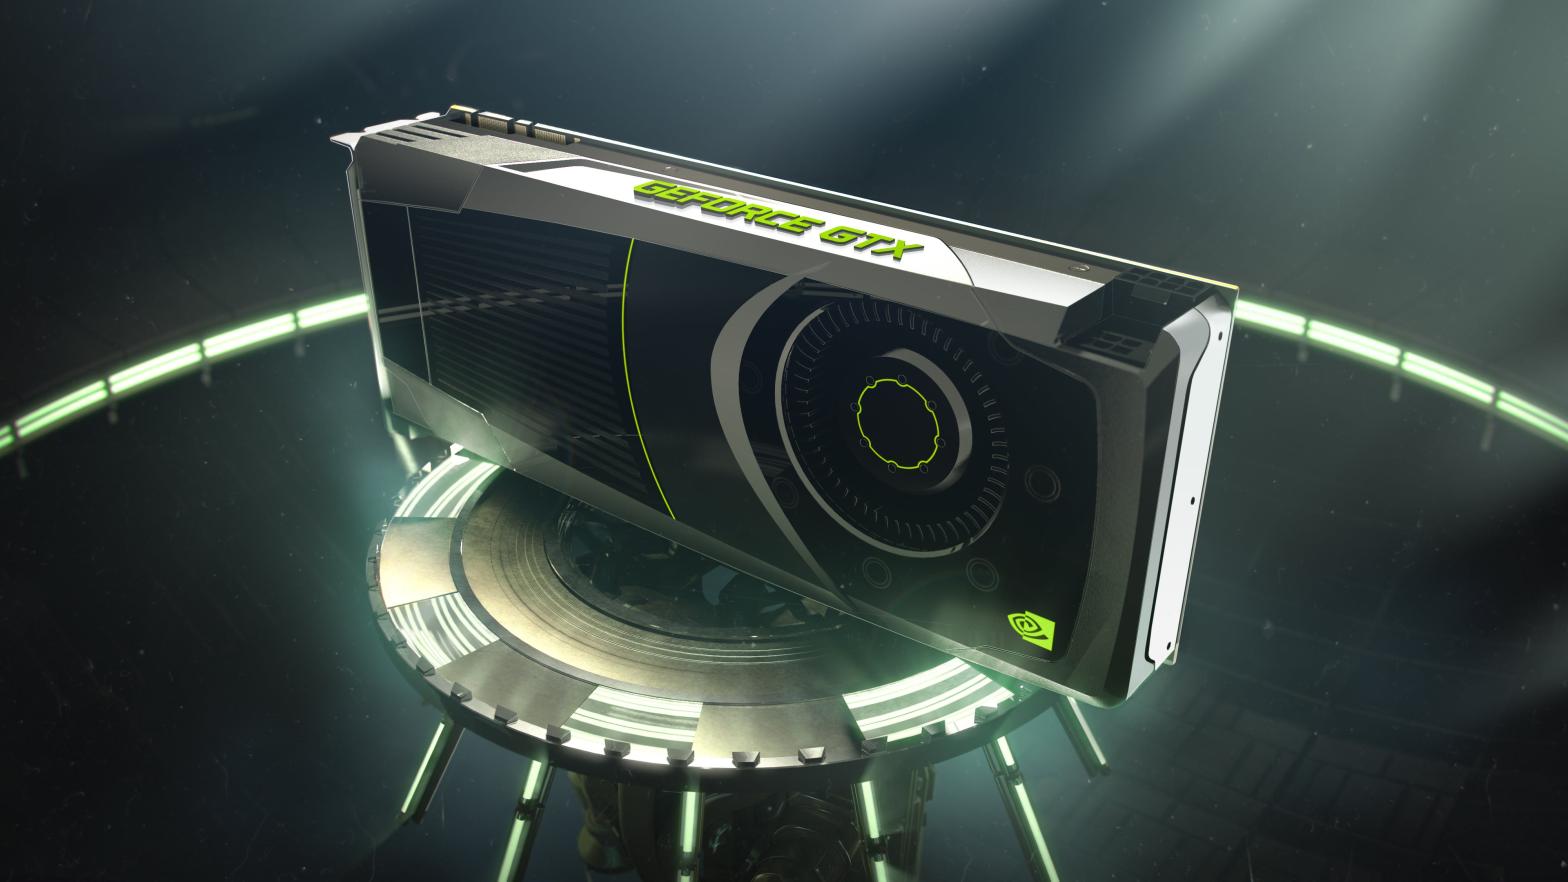 GTX 680 pictured (Image: Nvidia)